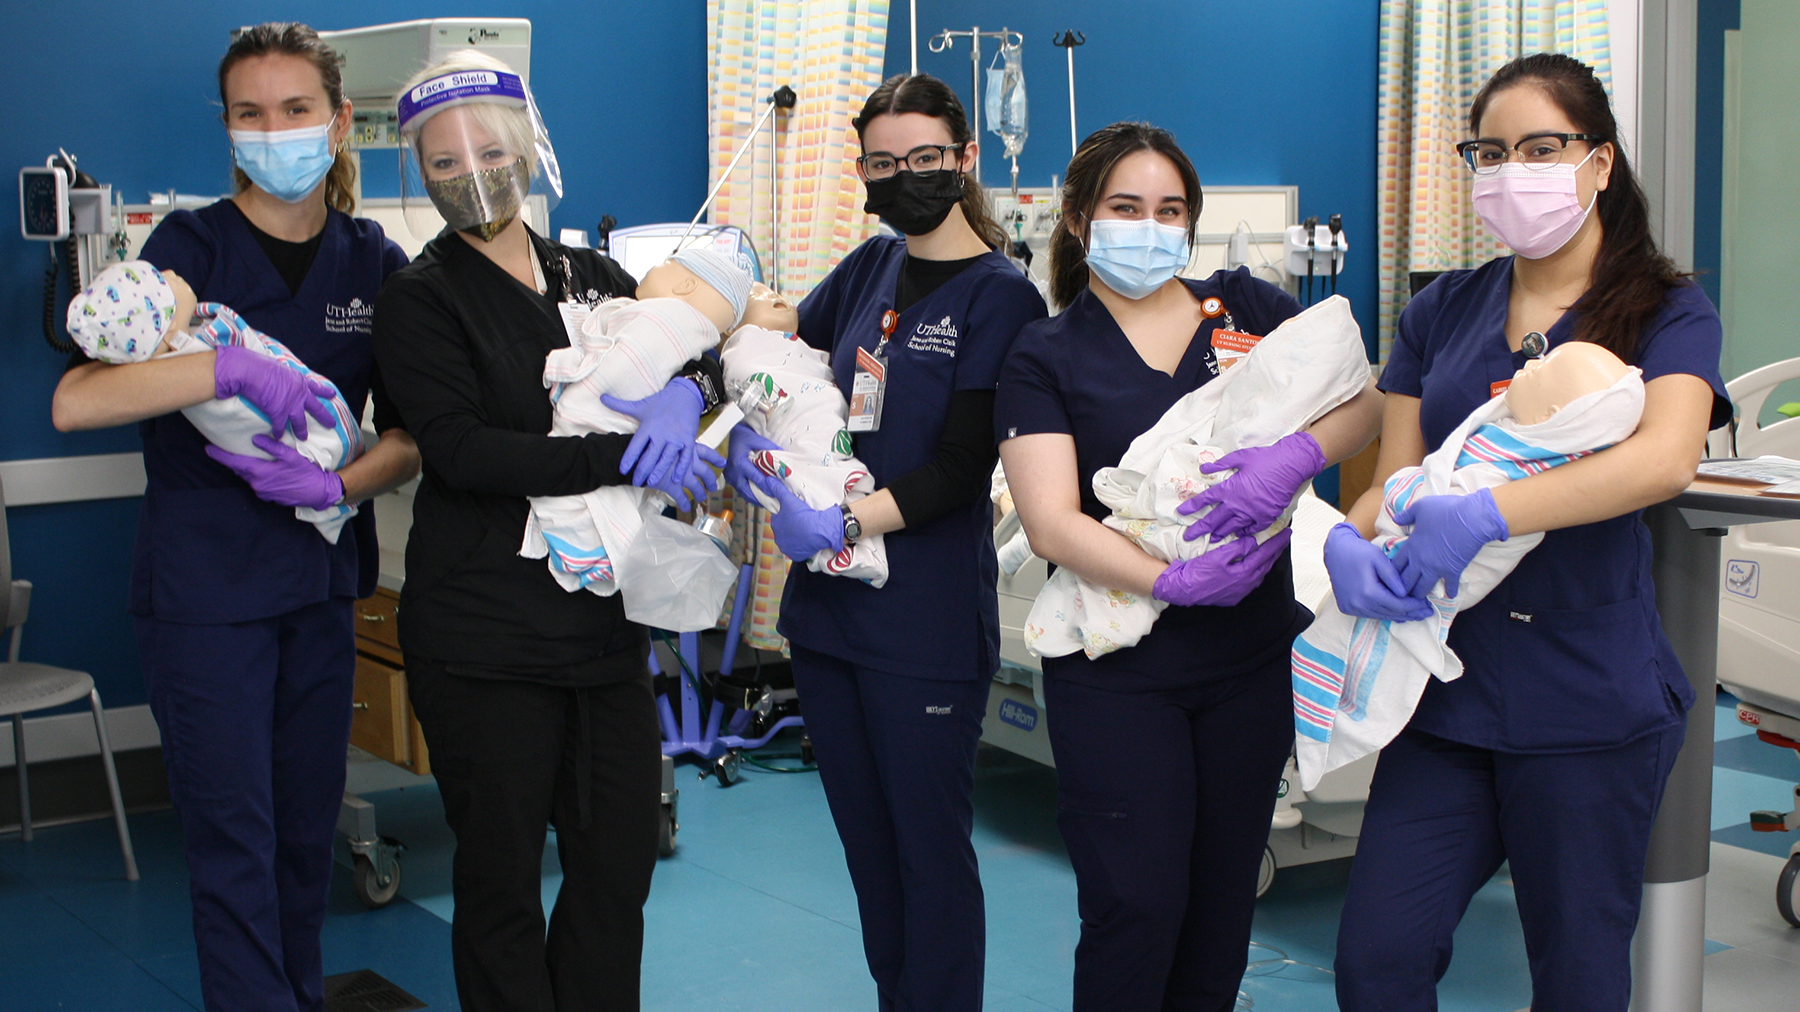 Instructor Candice Triulzi (second from left) taught BSN students how to resuscitate the littlest patients. Pictured with her (L-R) are students Claire Basso, Mackenzie Arrington, Gabriela Rosales-Valdes, and Ciara Santos.